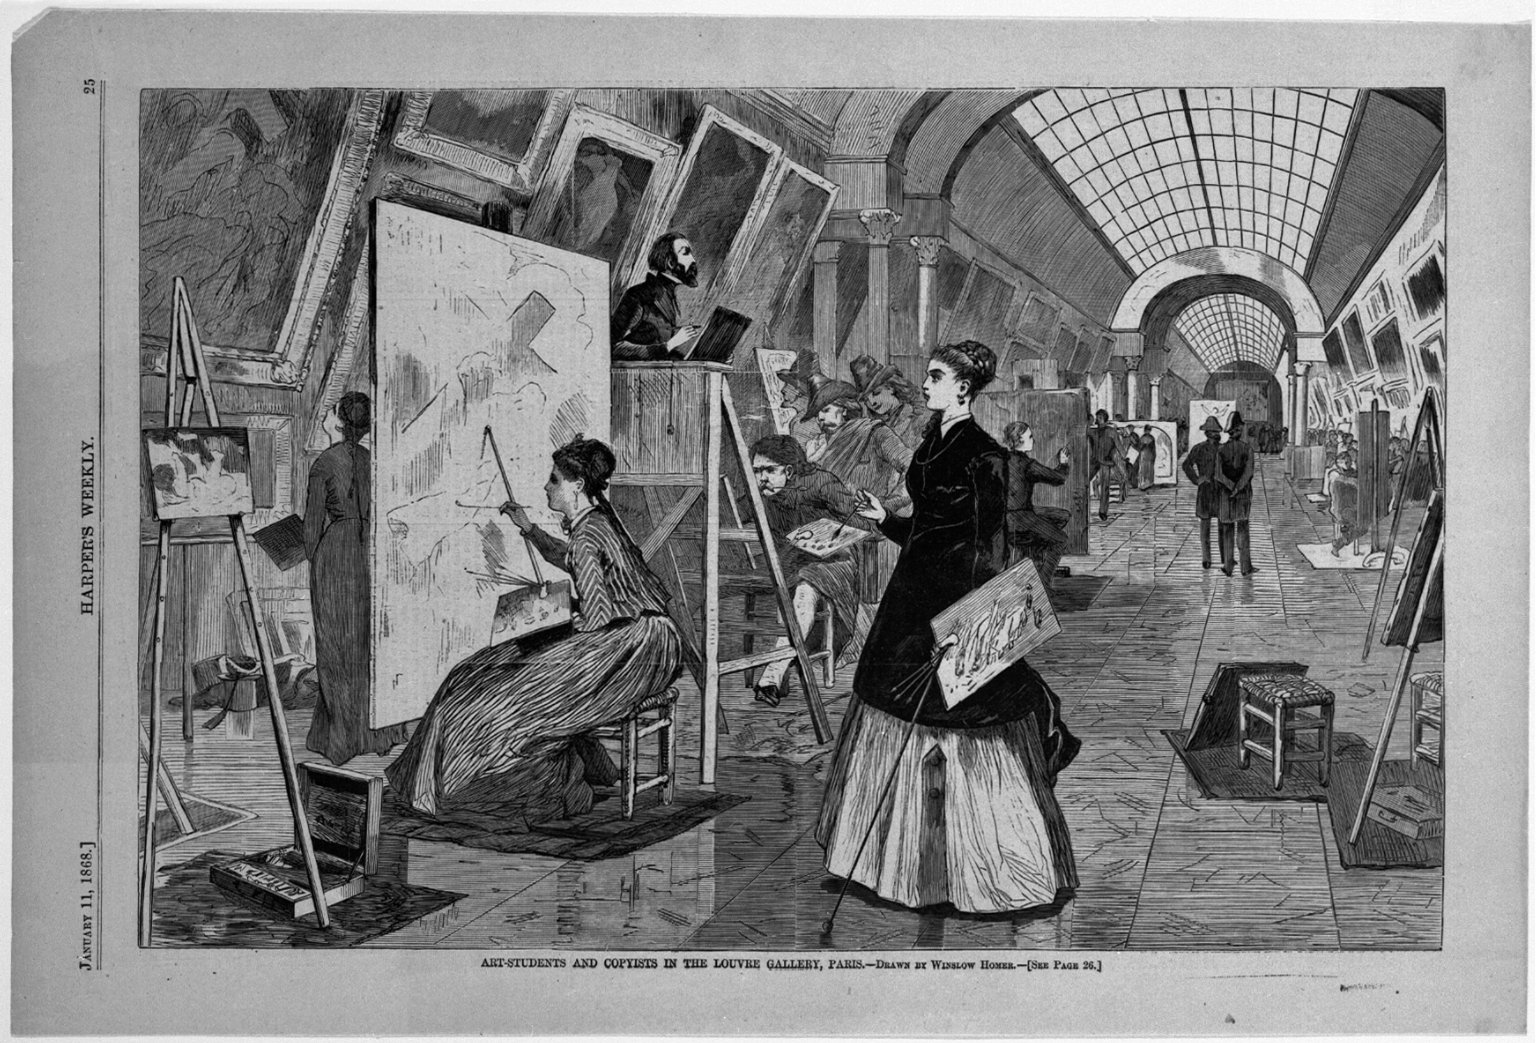 Art-Students and Copyists in the Louvre Gallery, Paris, 1868